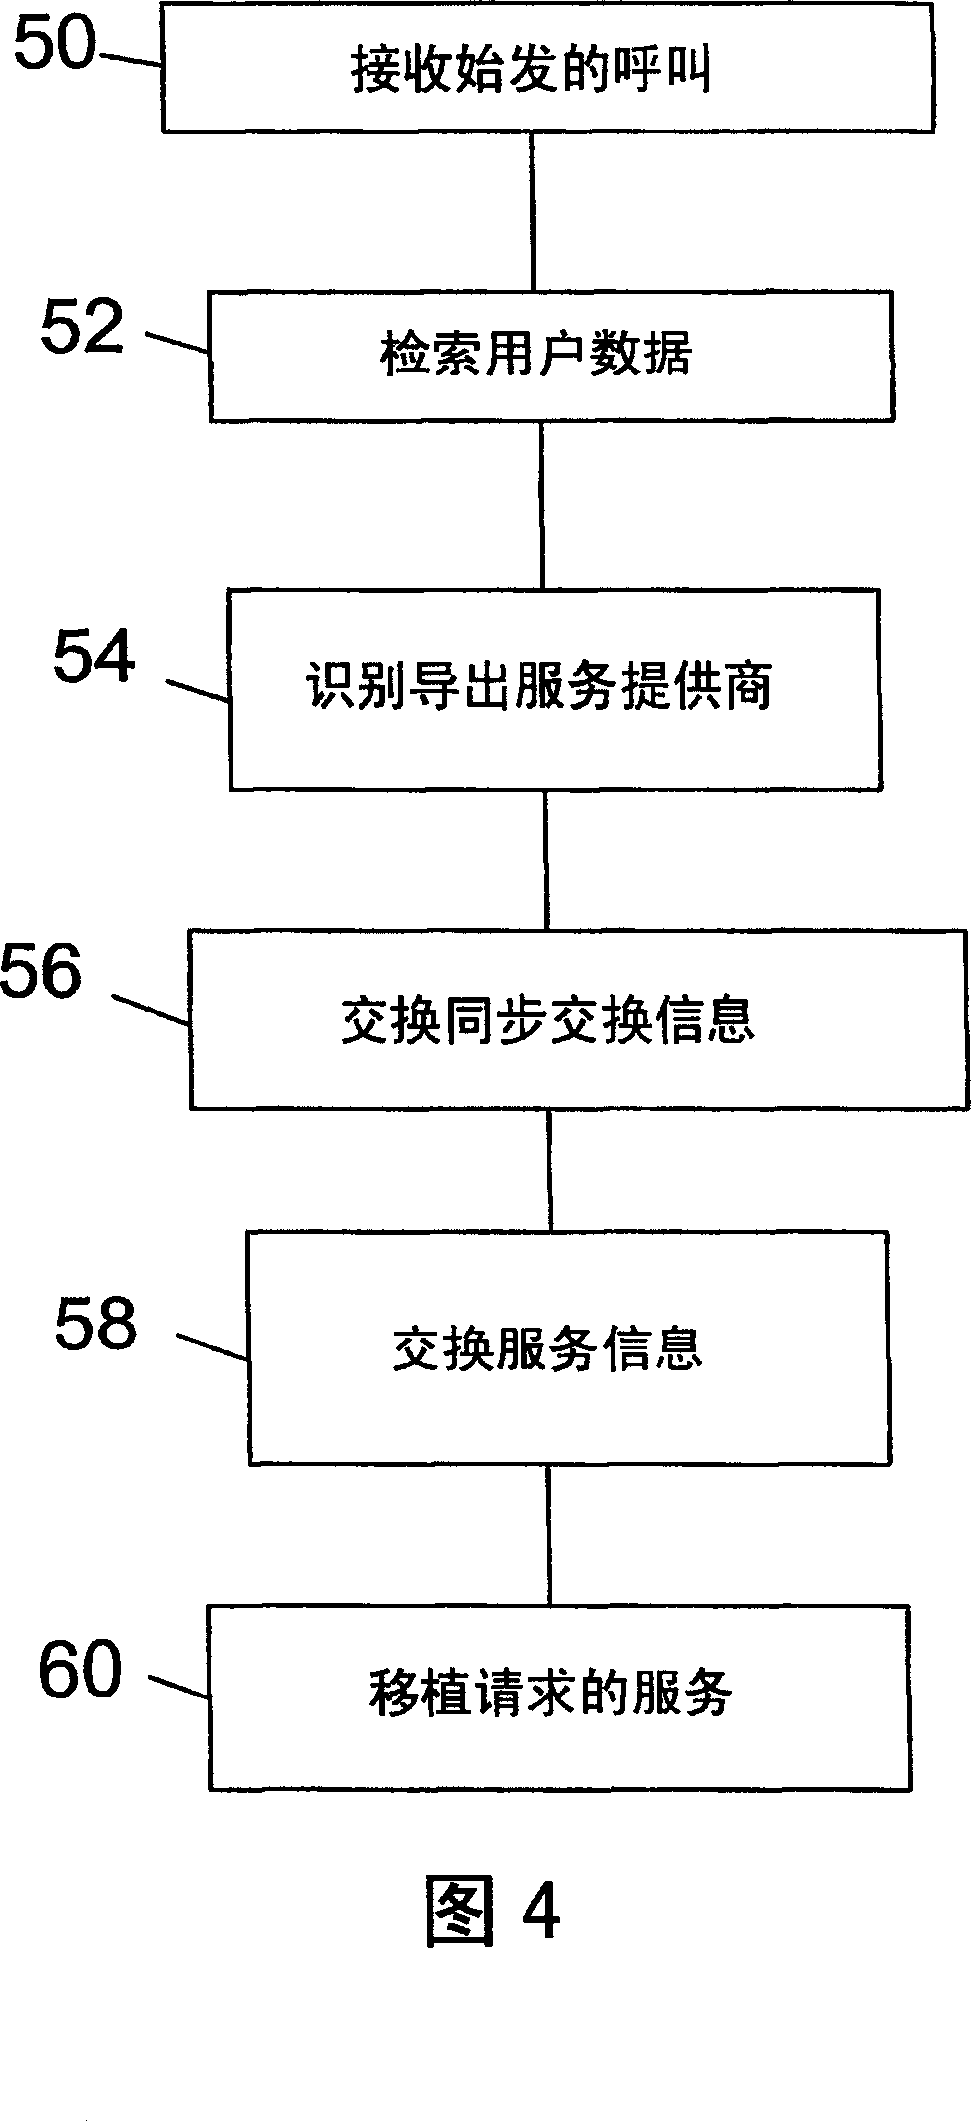 Method for remote service forwarding between dissimilar systems with operator, service and location portability